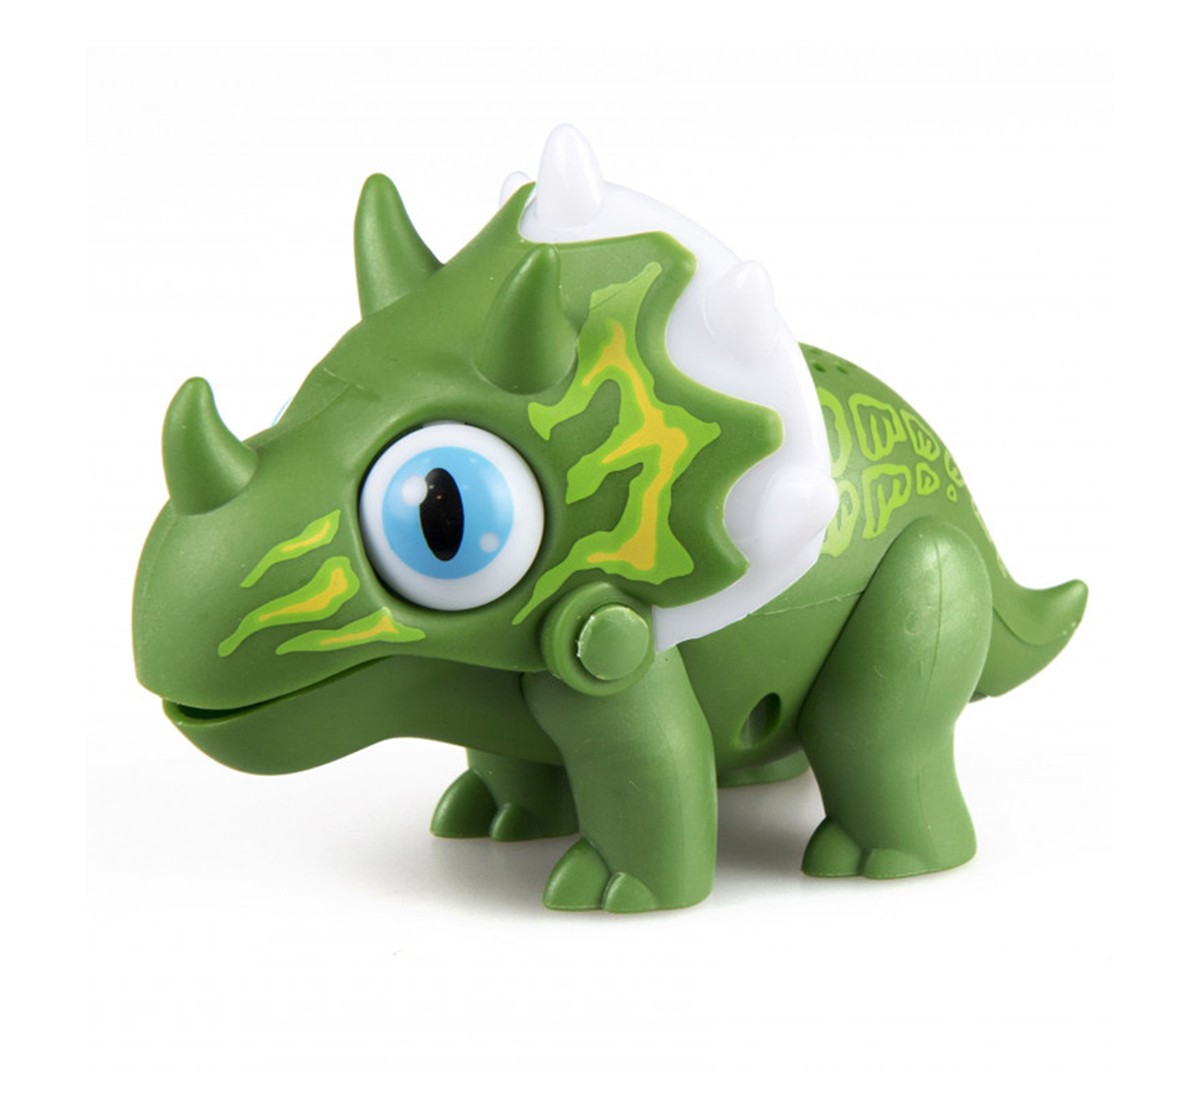 Silverlit YCOO Gloopies Dino can snap up tiny metals with its tongues and bring you “tongues” of surprises Ready To Play Available In 3 Multi Colours Robotics for Kids age 3Y+ 